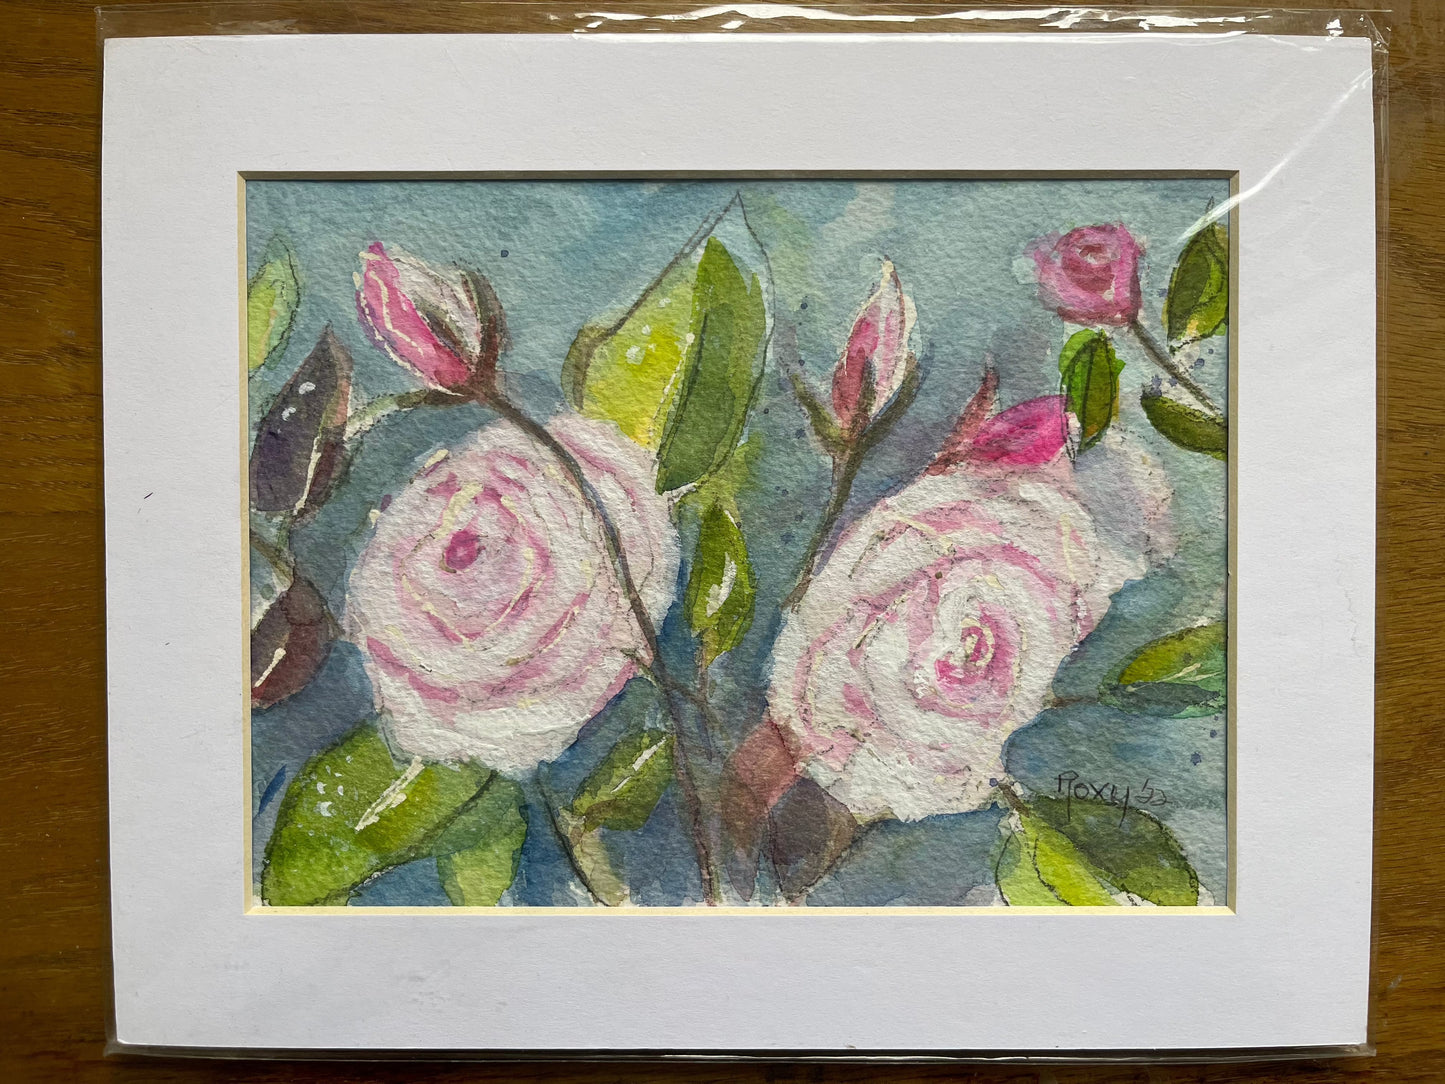 Fluffy White Roses Original Watercolor and Gouache Painting 6x8